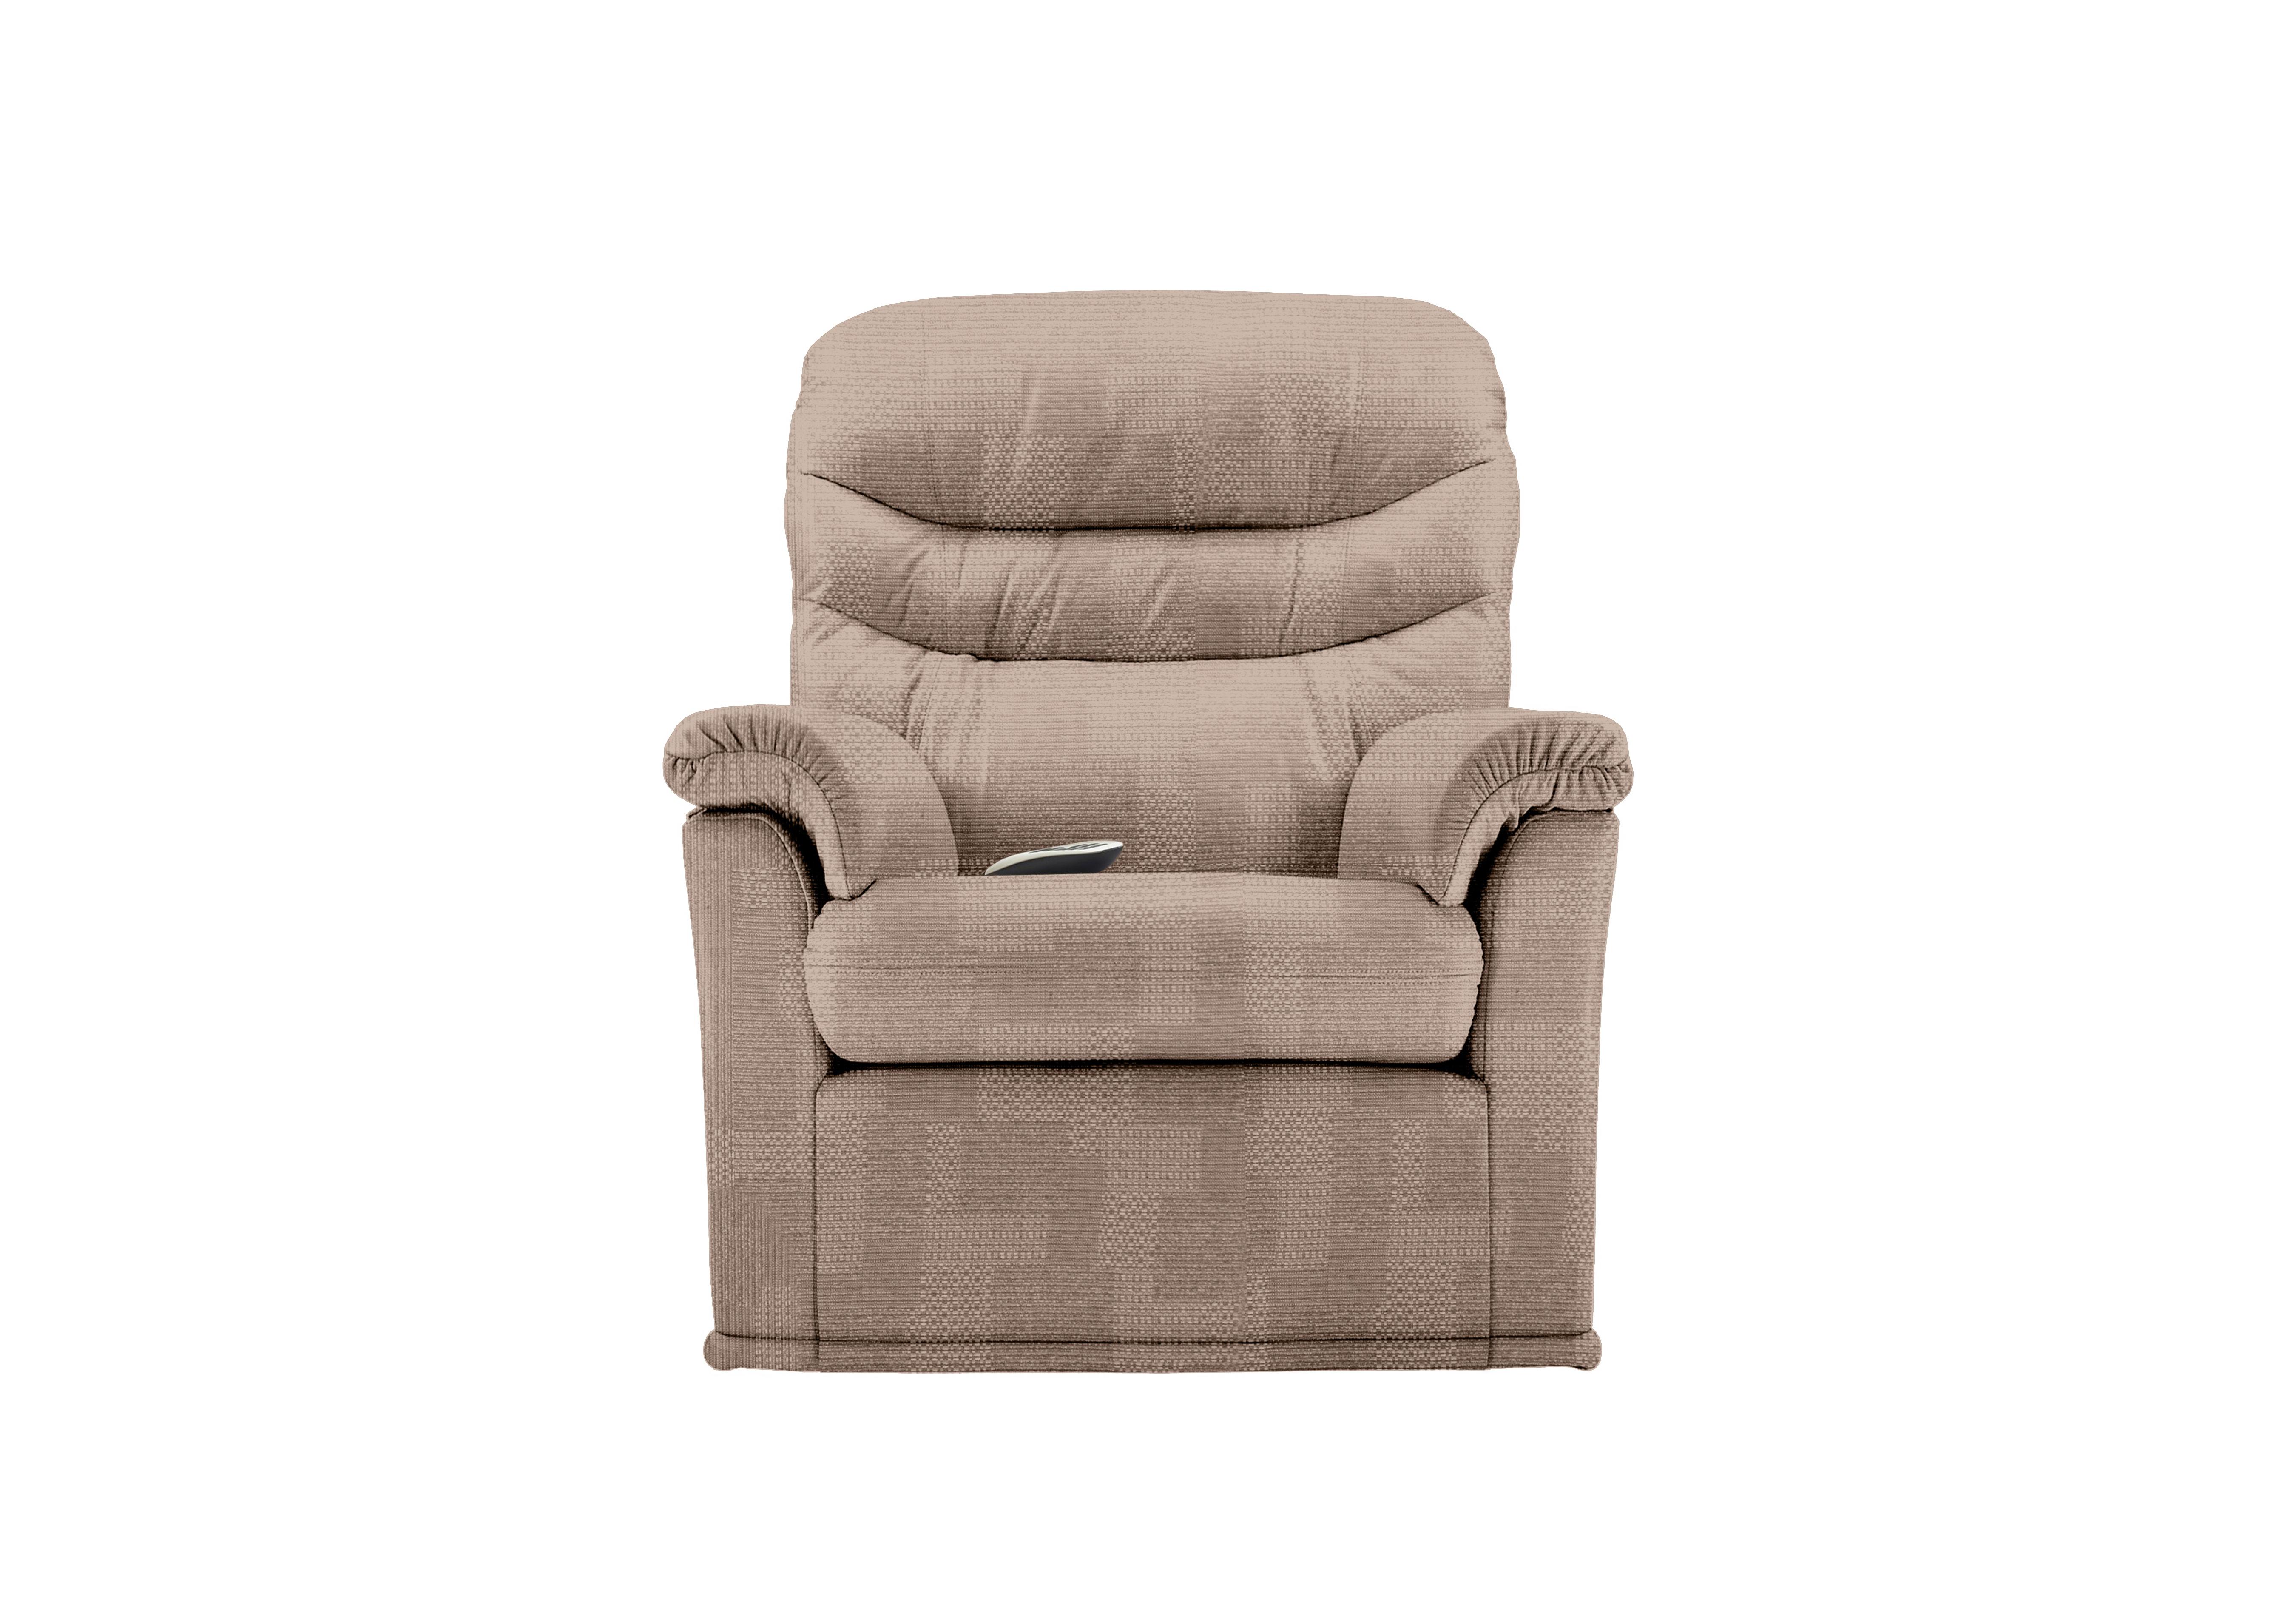 Malvern Fabric Small Rise and Recline Armchair in A800 Faro Sand on Furniture Village